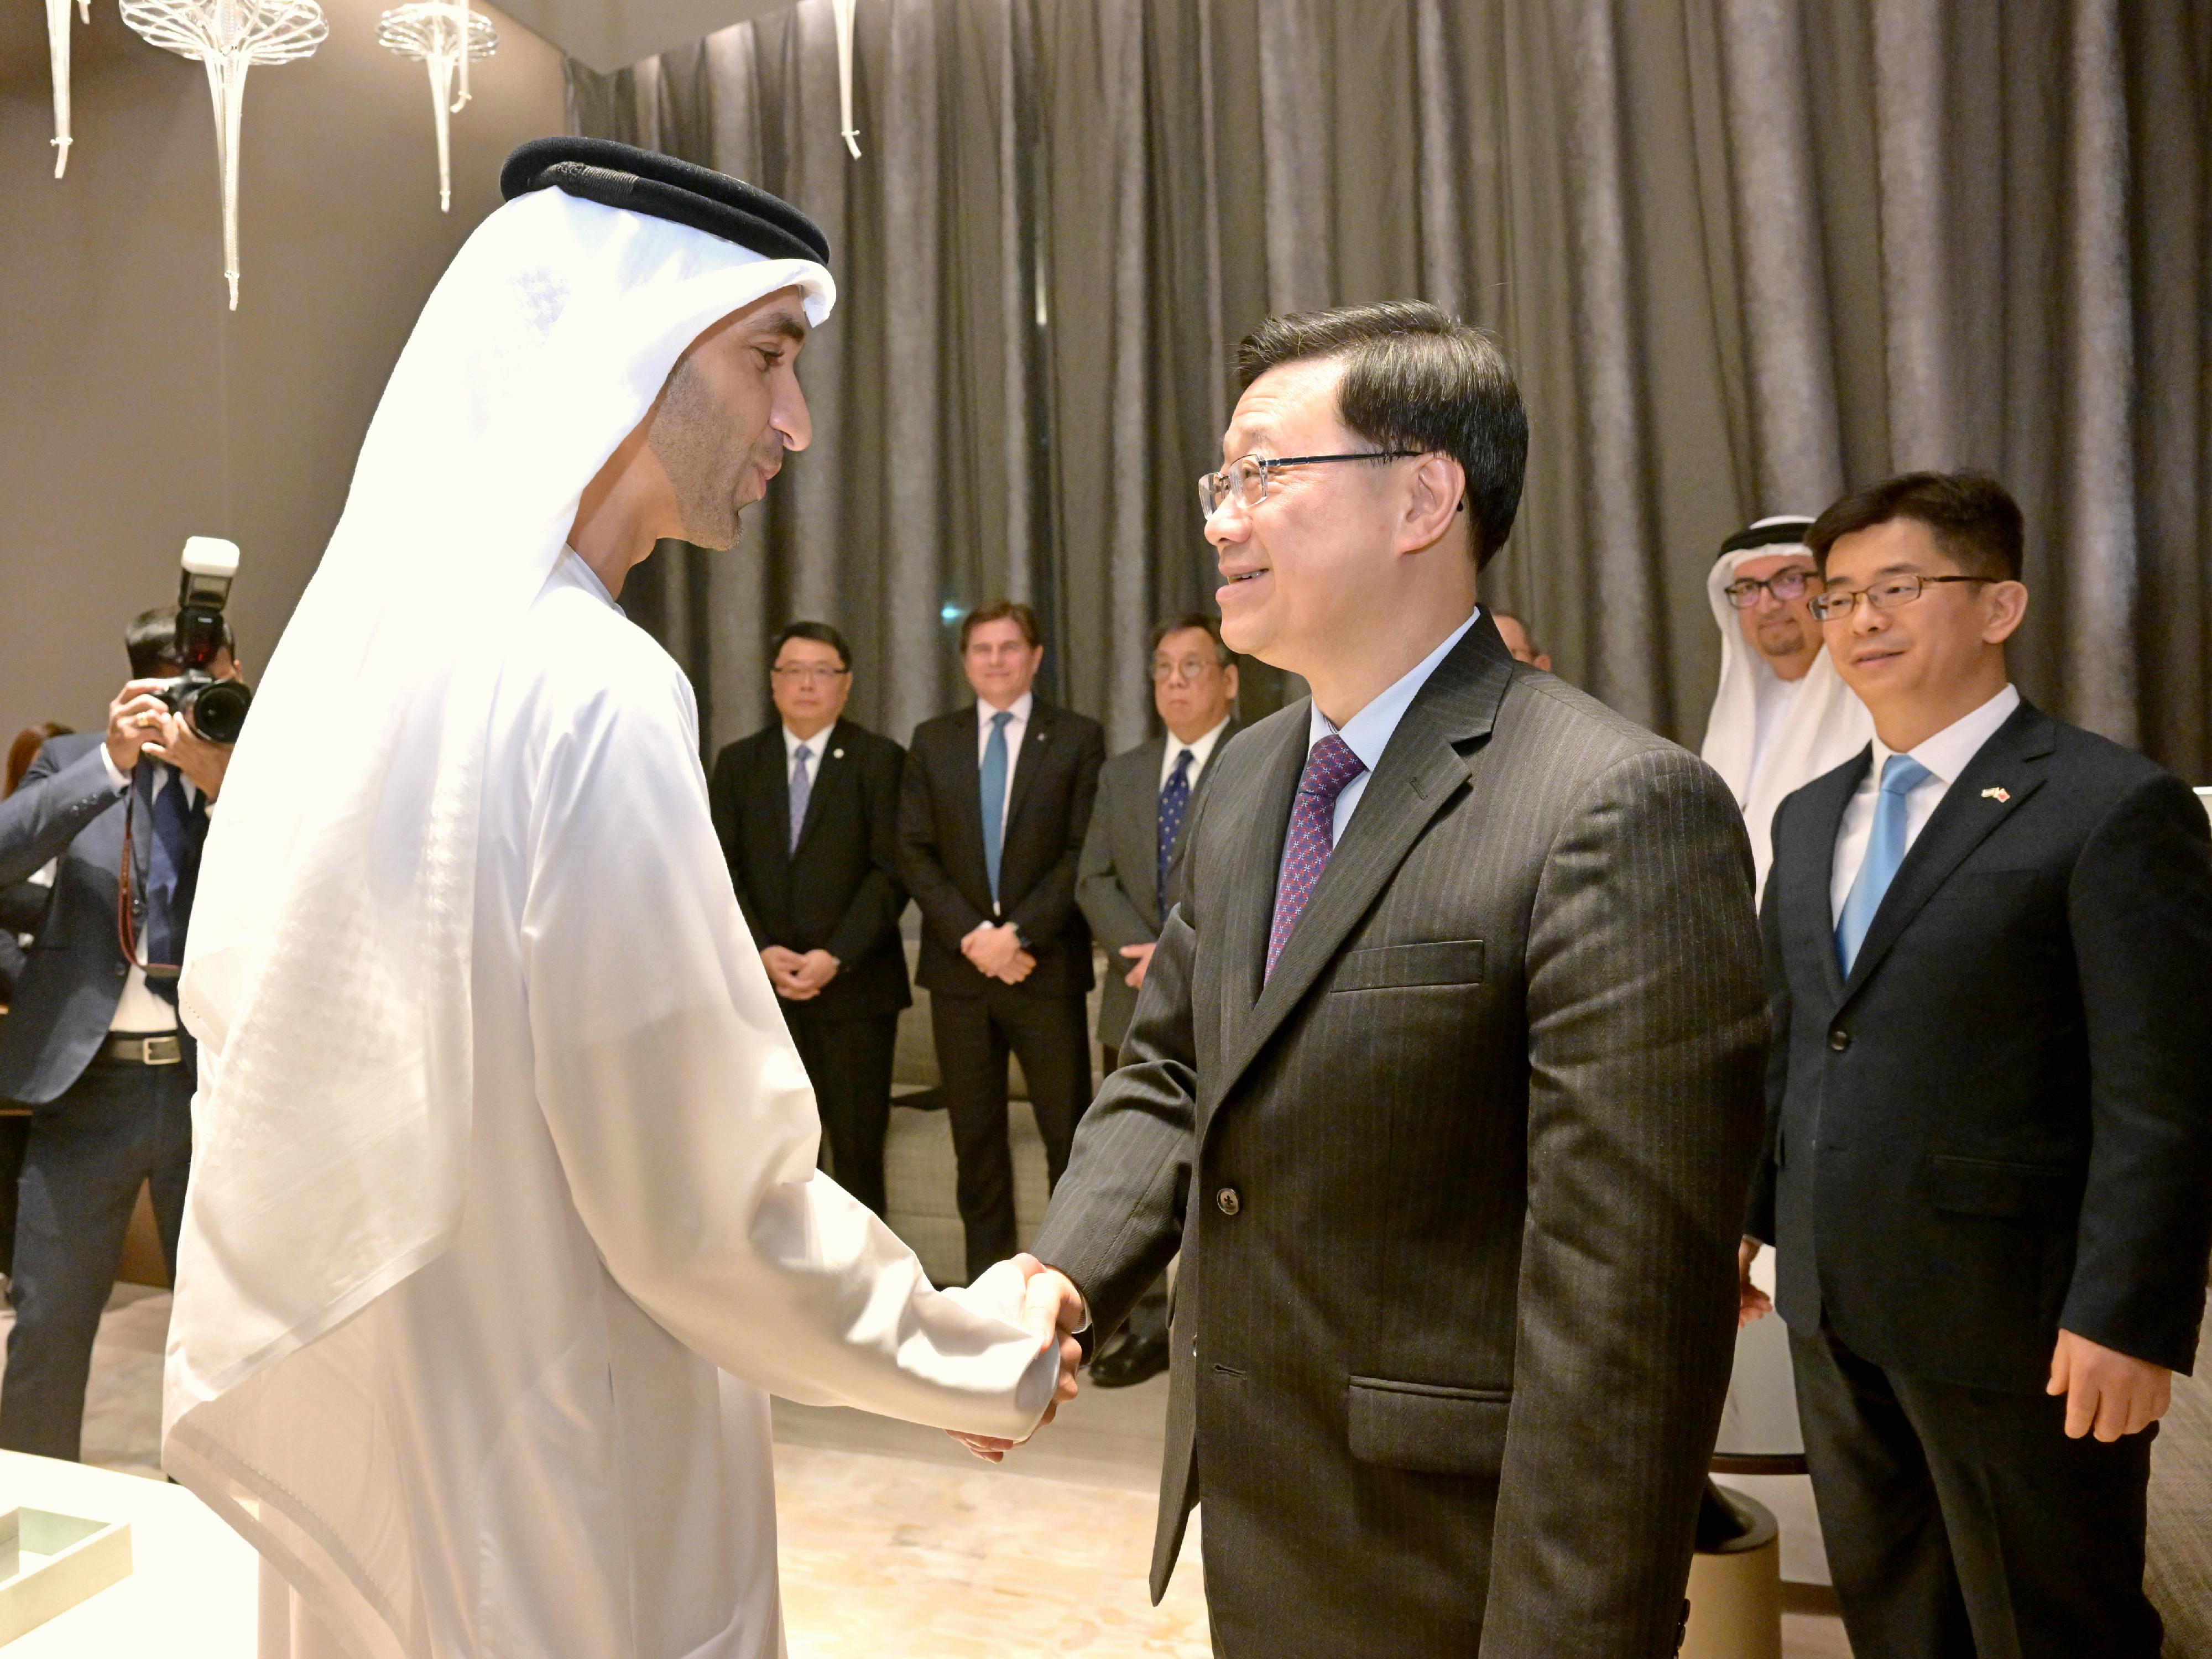 The Chief Executive, Mr John Lee (centre) meets with the Minister of State for Foreign Trade of the United Arab Emirates (UAE), Dr Thani bin Ahmed Al Zeyoudi (left), in Dubai, the UAE, today (February 8, Dubai time).